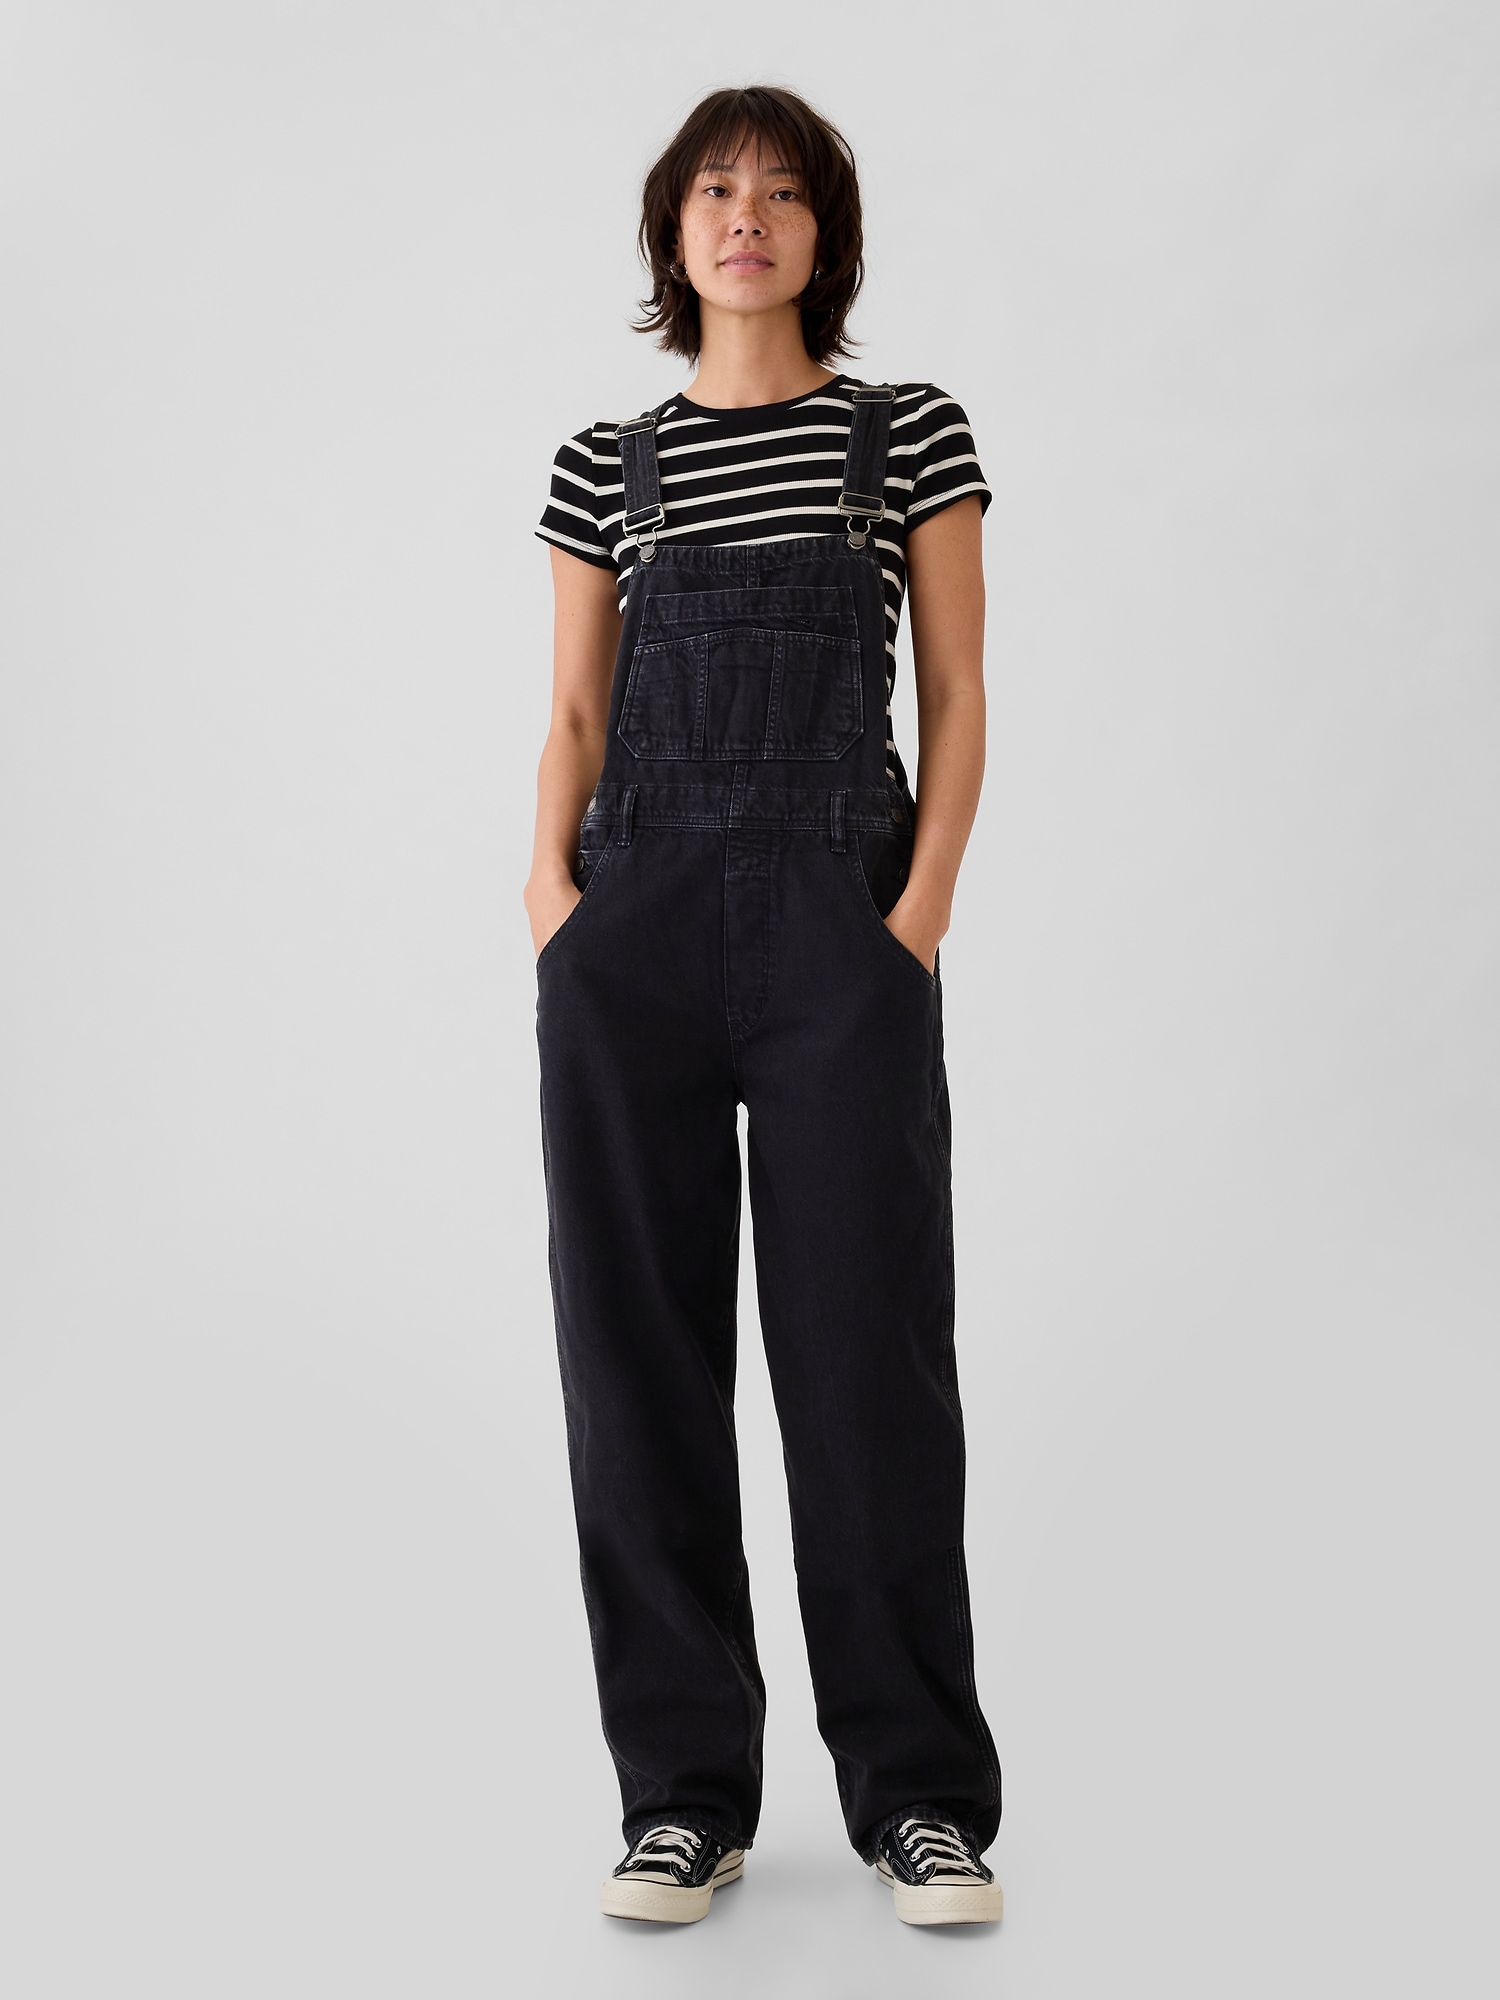 '90s Loose Overalls